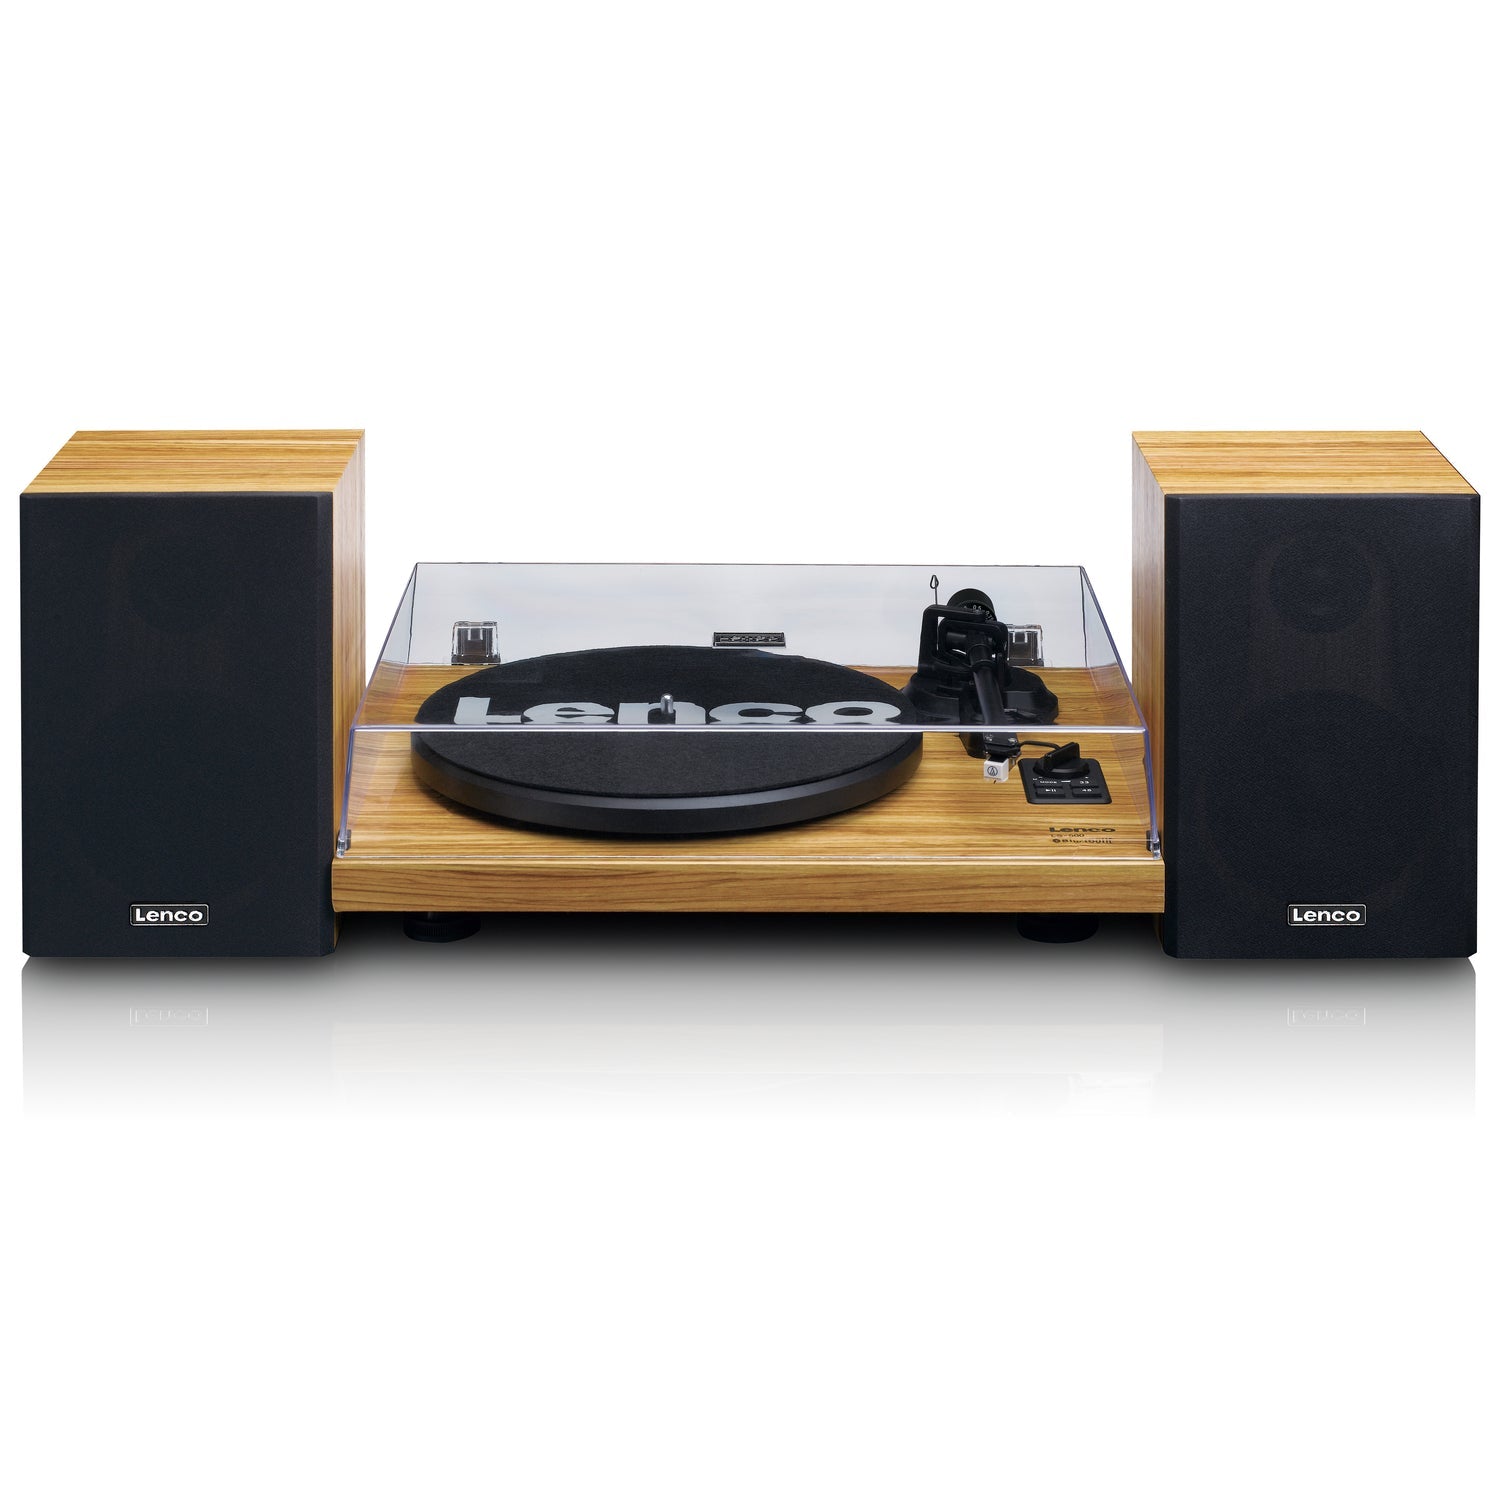 Lenco LS-500OK Record player with Built-in amplifier and Bluetooth plus 2 external speakers - Wood